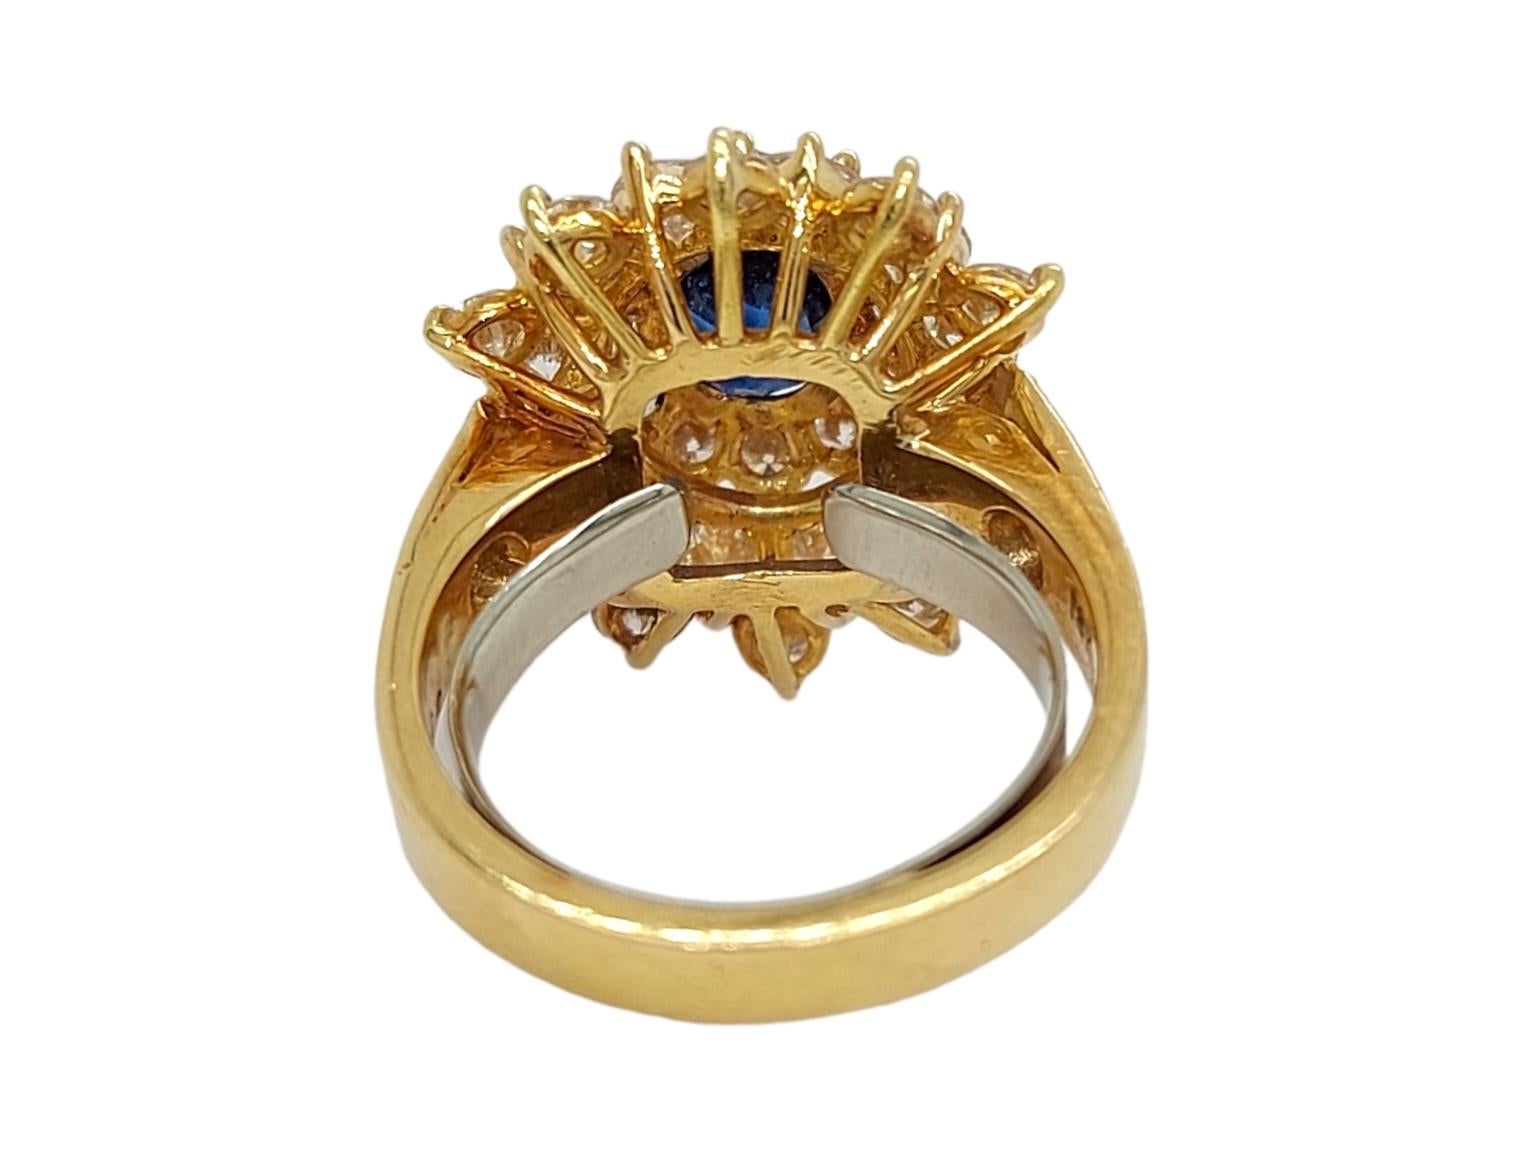 18 kt Yellow Gold Ring with 2ct Sapphire and 2.8ct Diamonds, Estate Sultan Oman For Sale 5